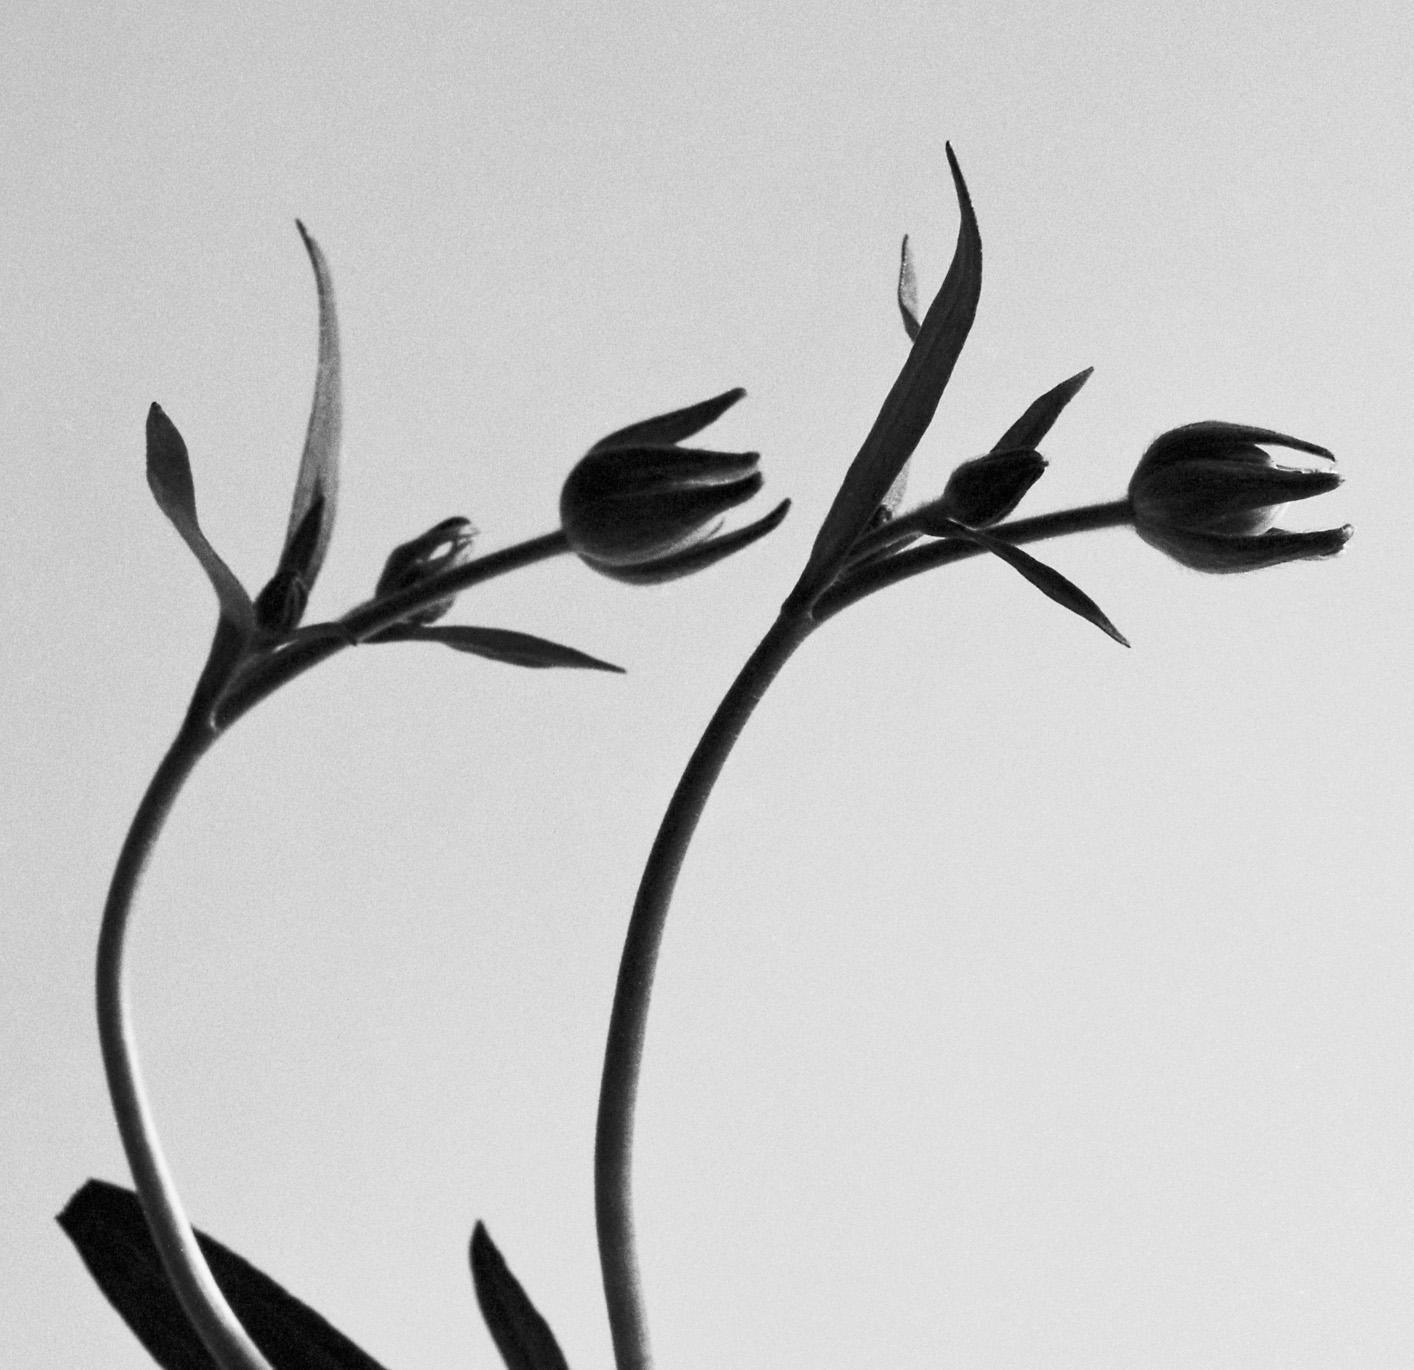 Ranunculus Butterfly no.2 - analogue black and white floral photography - Naturalistic Photograph by Ugne Pouwell